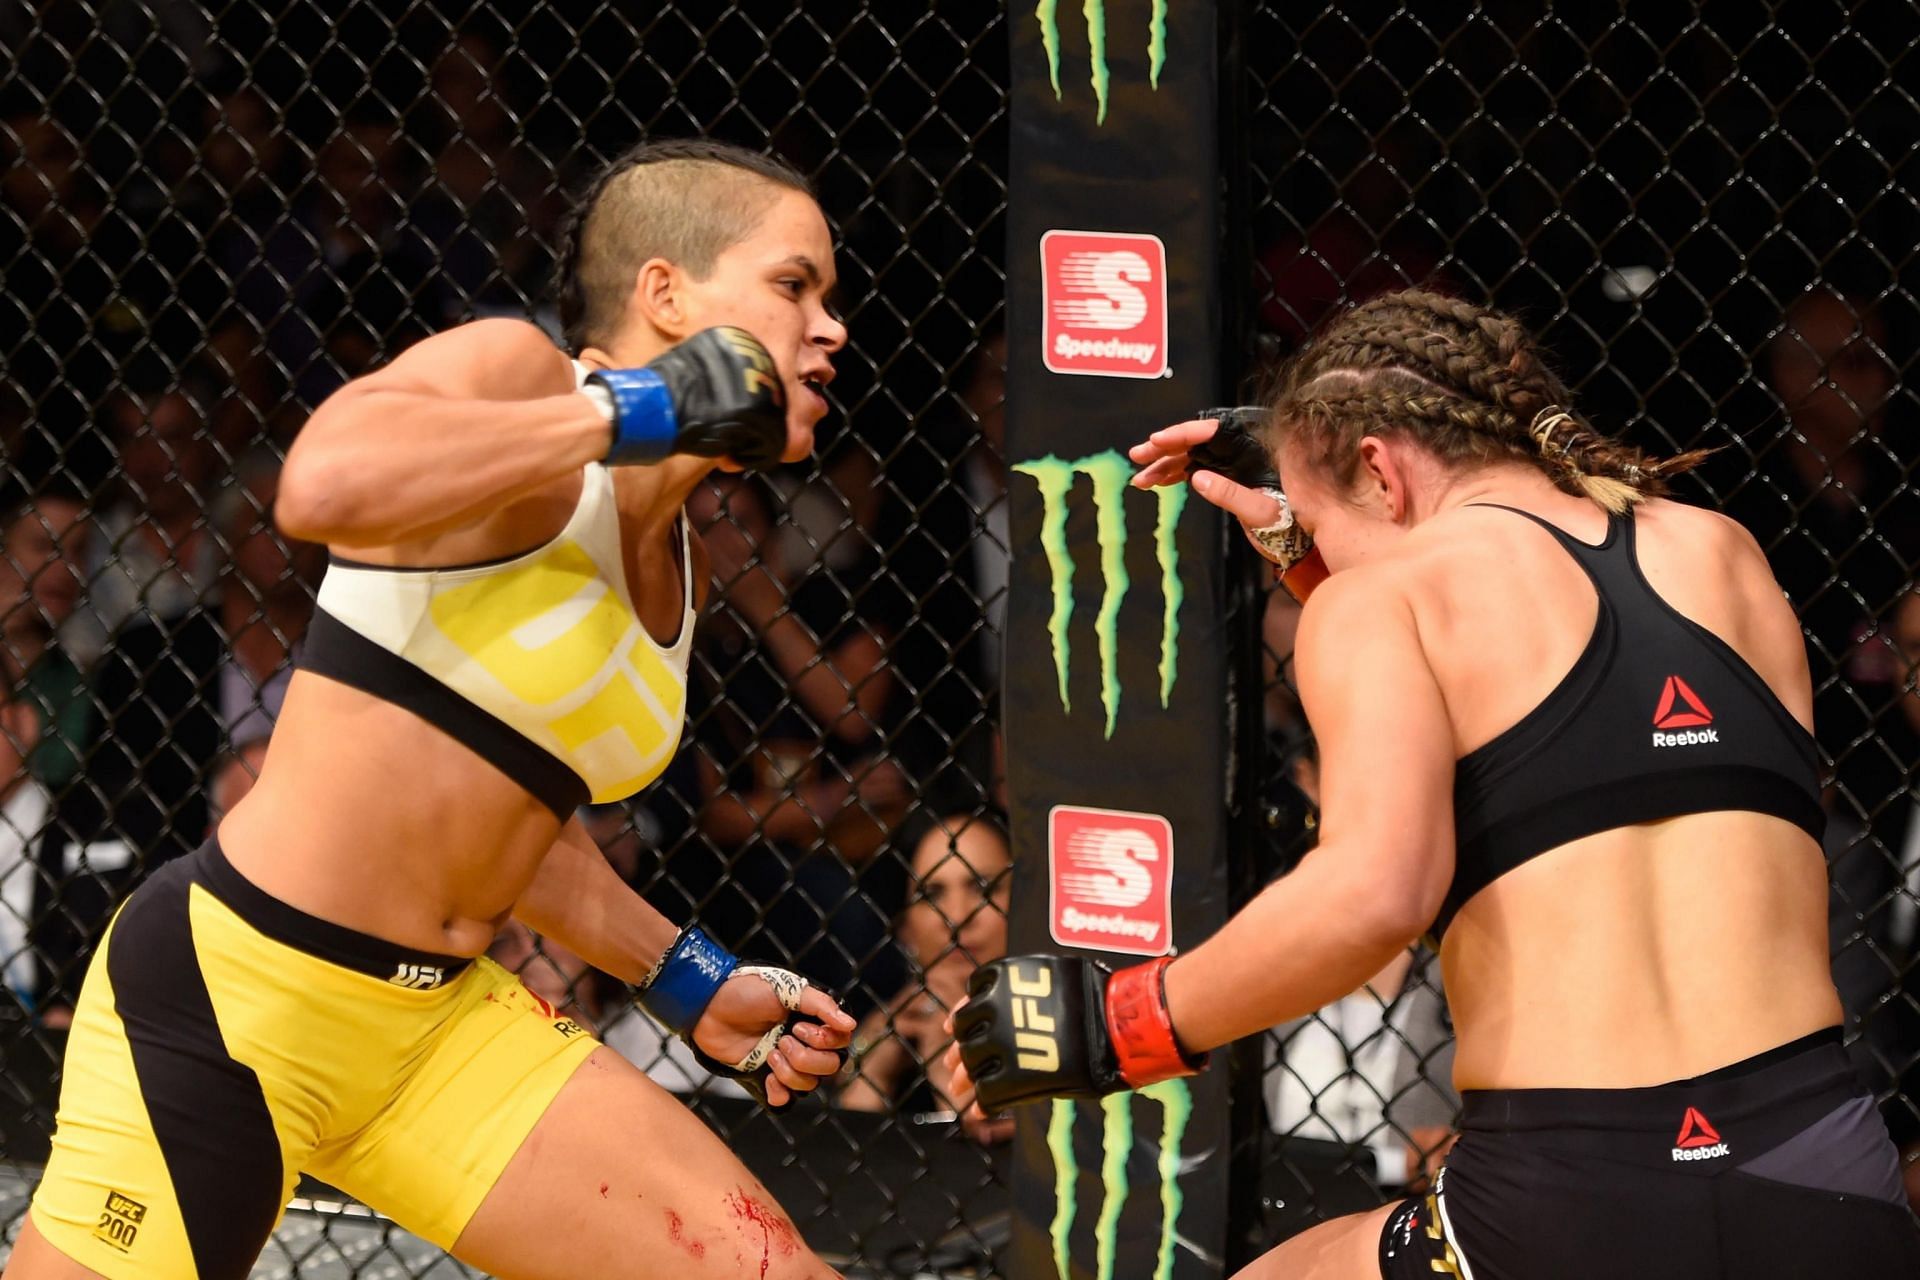 Amanda Nunes dispatched Miesha Tate in violent fashion to become UFC bantamweight queen in 2016